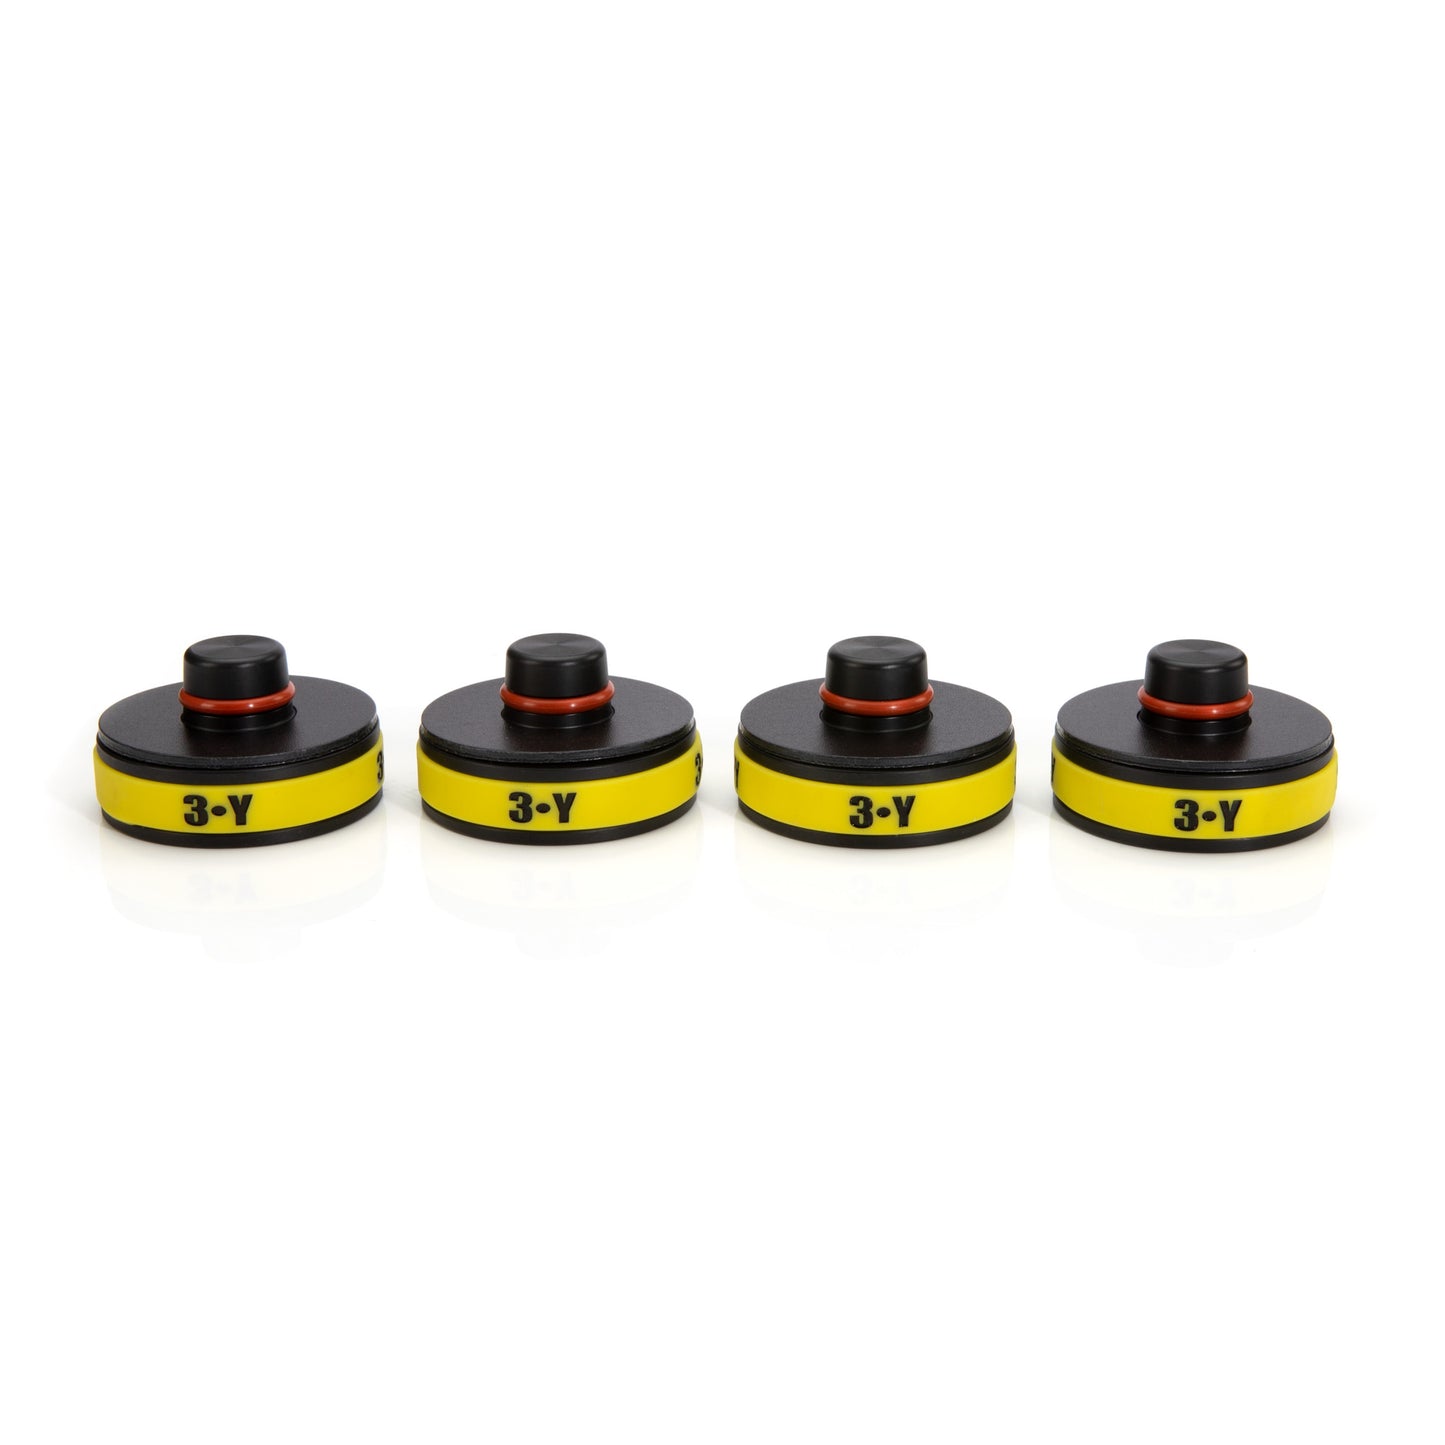 8-Piece Friction Fit Jack Pad Risers Multi-Pack for Tesla Models 3, Y, S and X